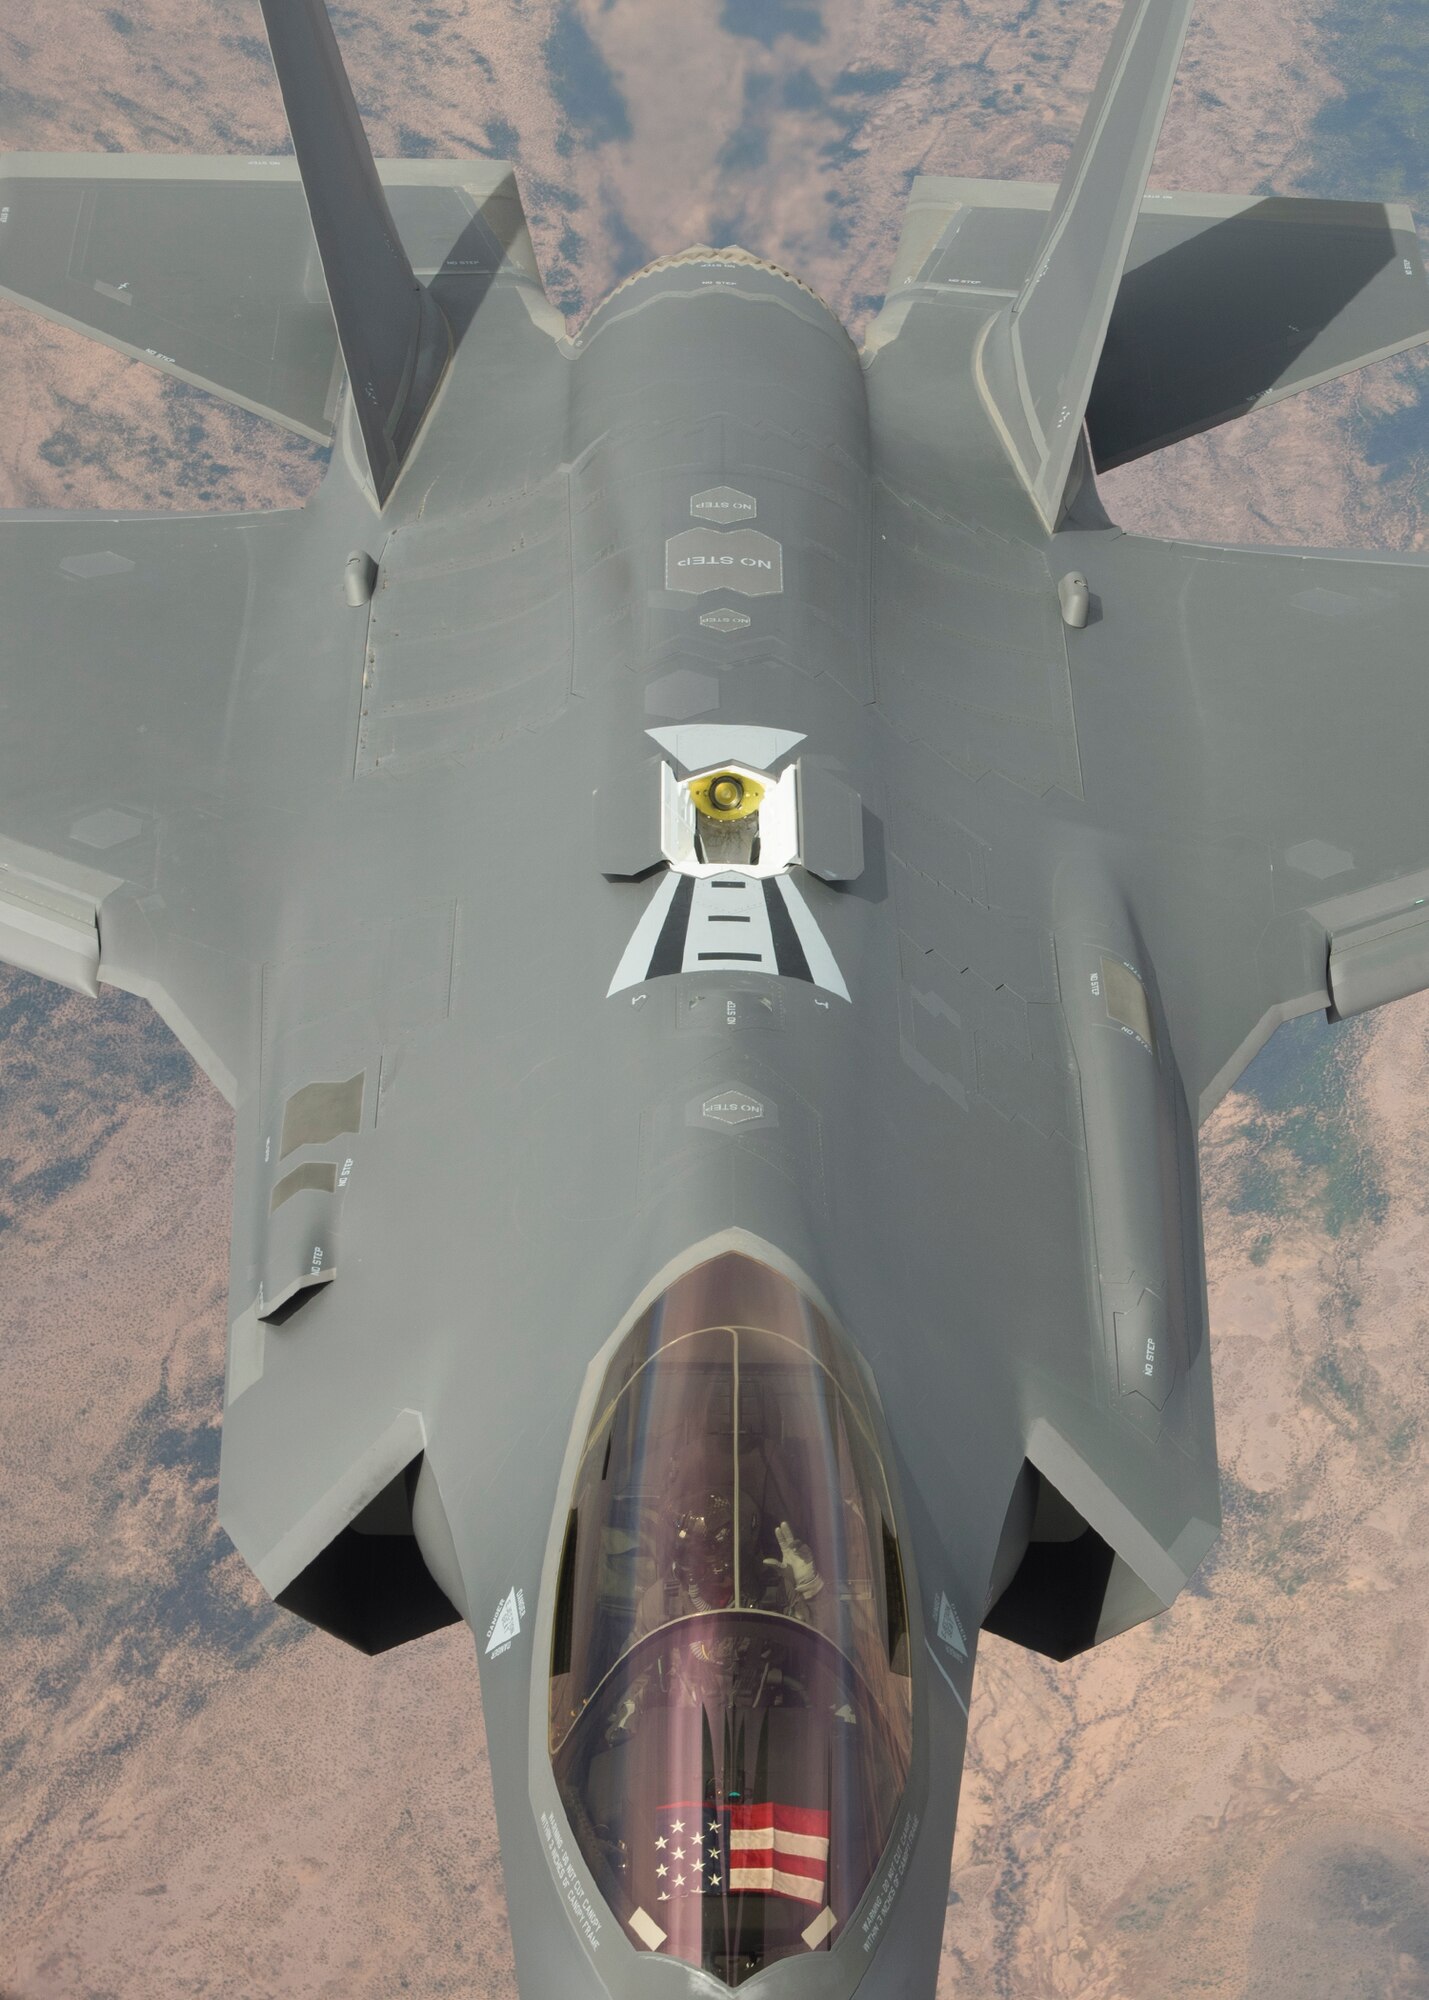 A Republic of Korea Air Force, F-35A Lightning II pilot waves after being refueled by a KC-135 Stratotanker, March 15, 2019, in Ariz. Aerial Refueling is the process in which on aircraft transfers fuel to another aircraft. This maneuver saves time and money by keeping jets from having to land mid-mission. (U.S. Air Force photo by Airman 1st Class Leala Marquez)